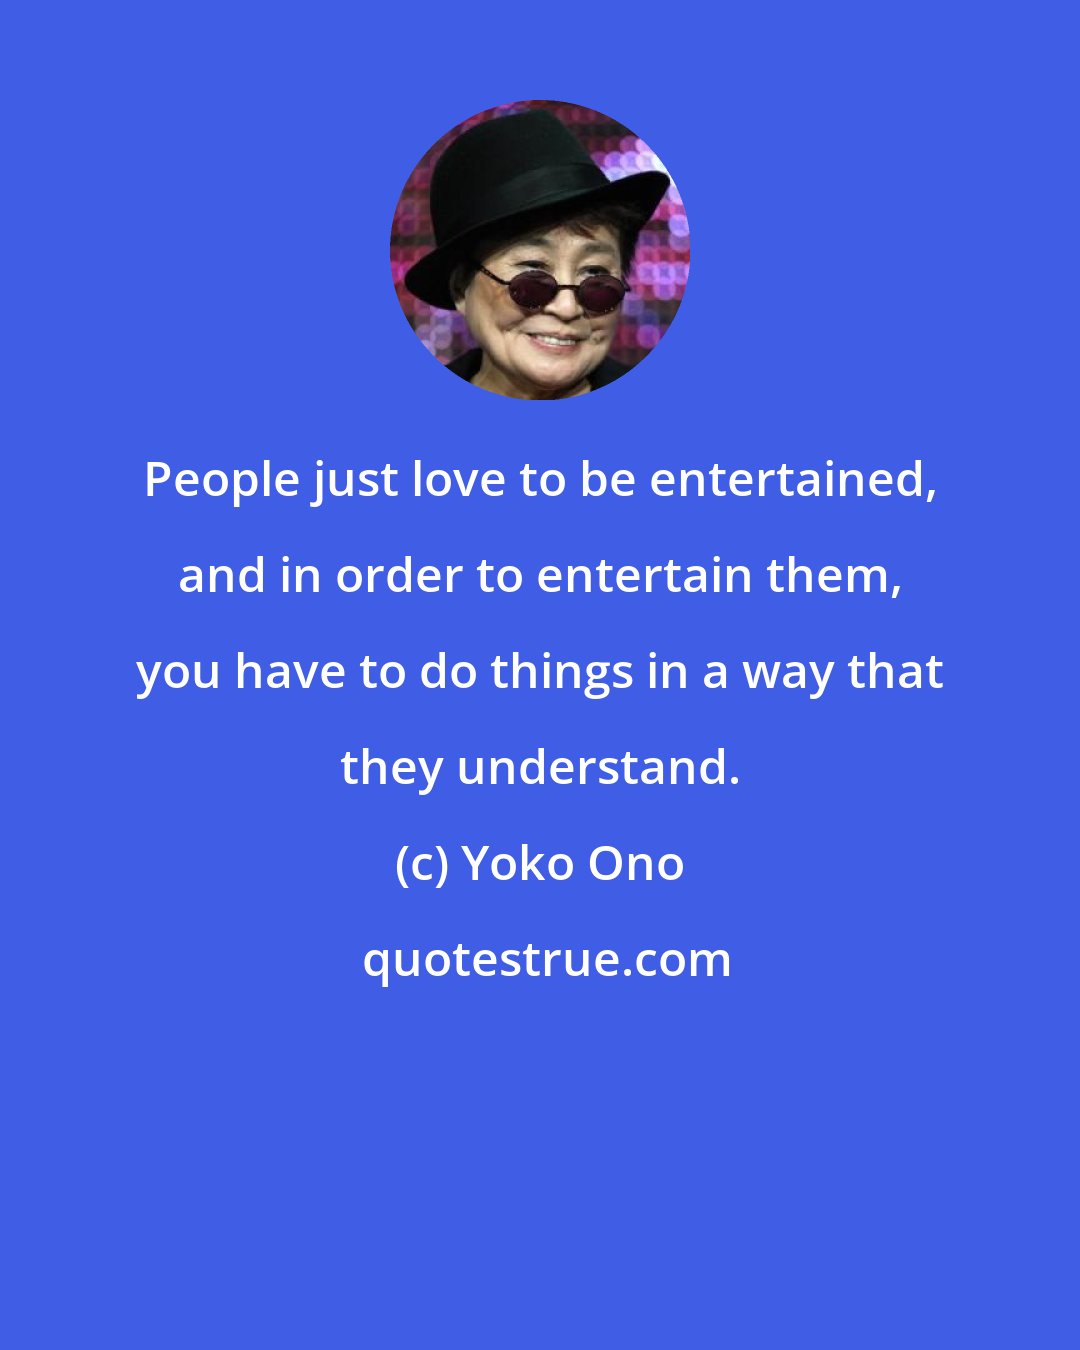 Yoko Ono: People just love to be entertained, and in order to entertain them, you have to do things in a way that they understand.